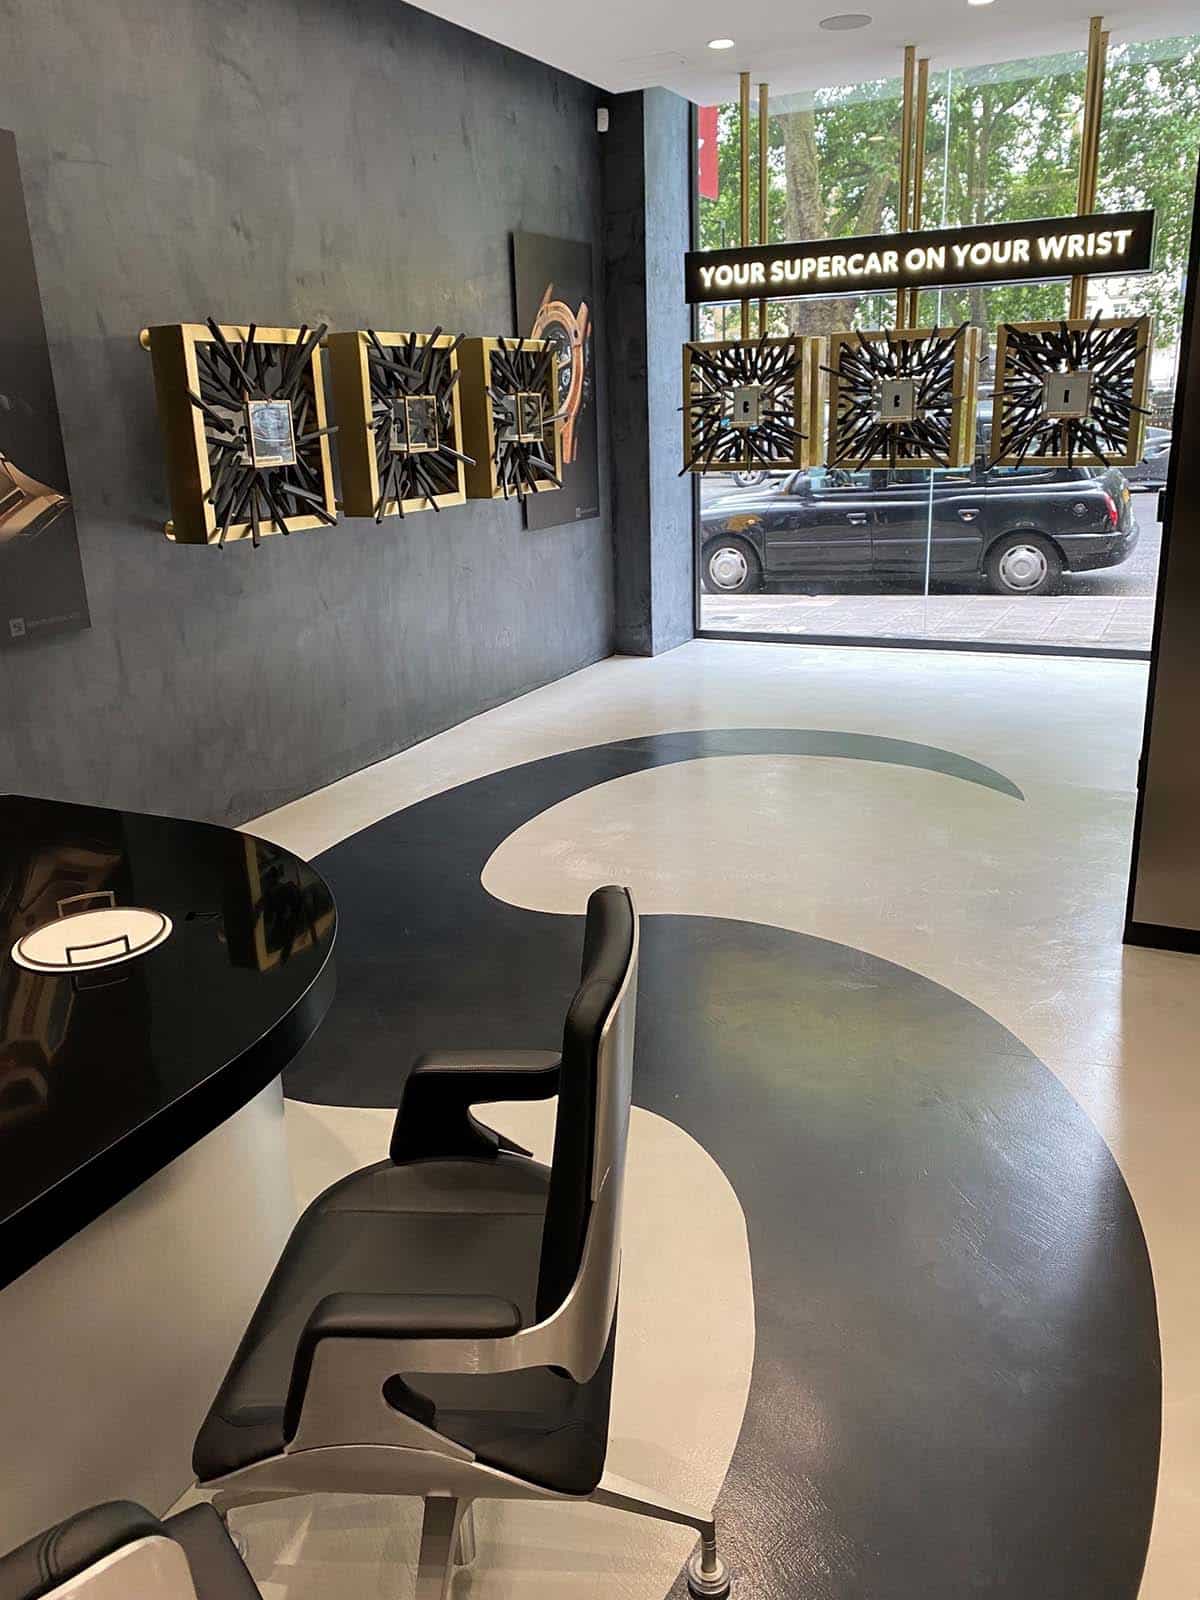 Polished Concrete floors at Senturion Key London Showroom by Polished Concrete Specialists